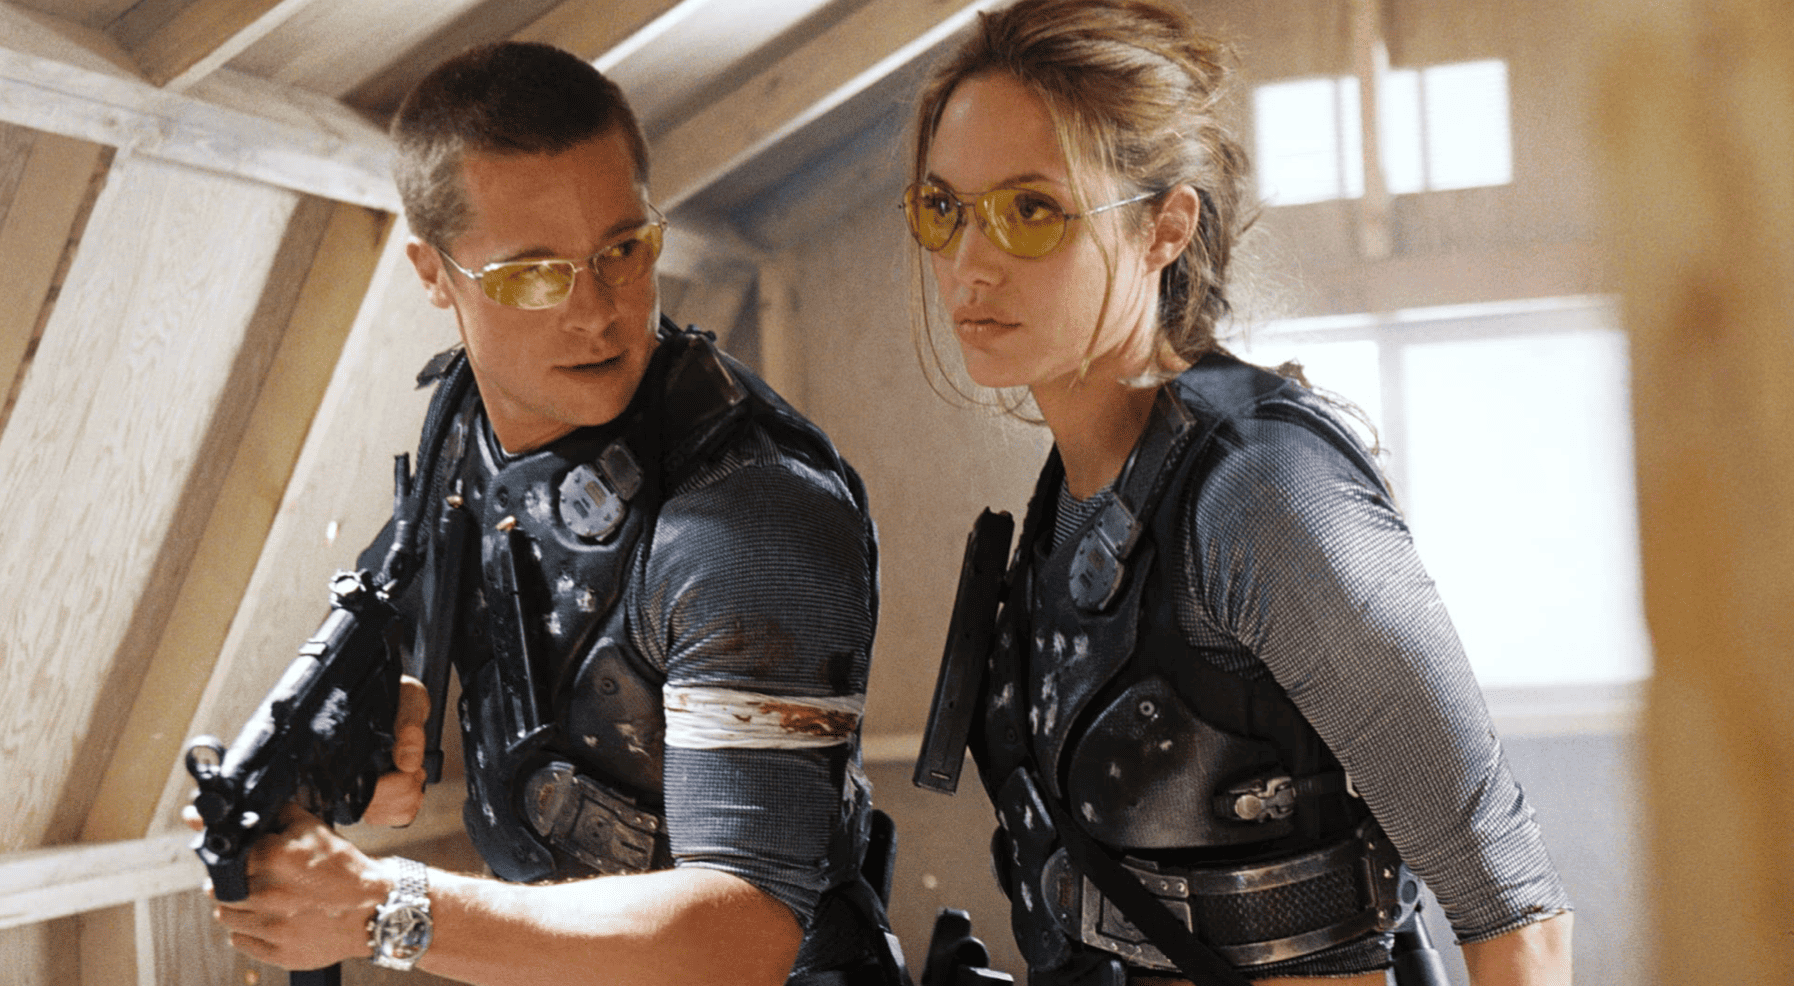 Brad Pitt and Angelina Jolie dressed in their assassin gear in this image from 20th Century Studios